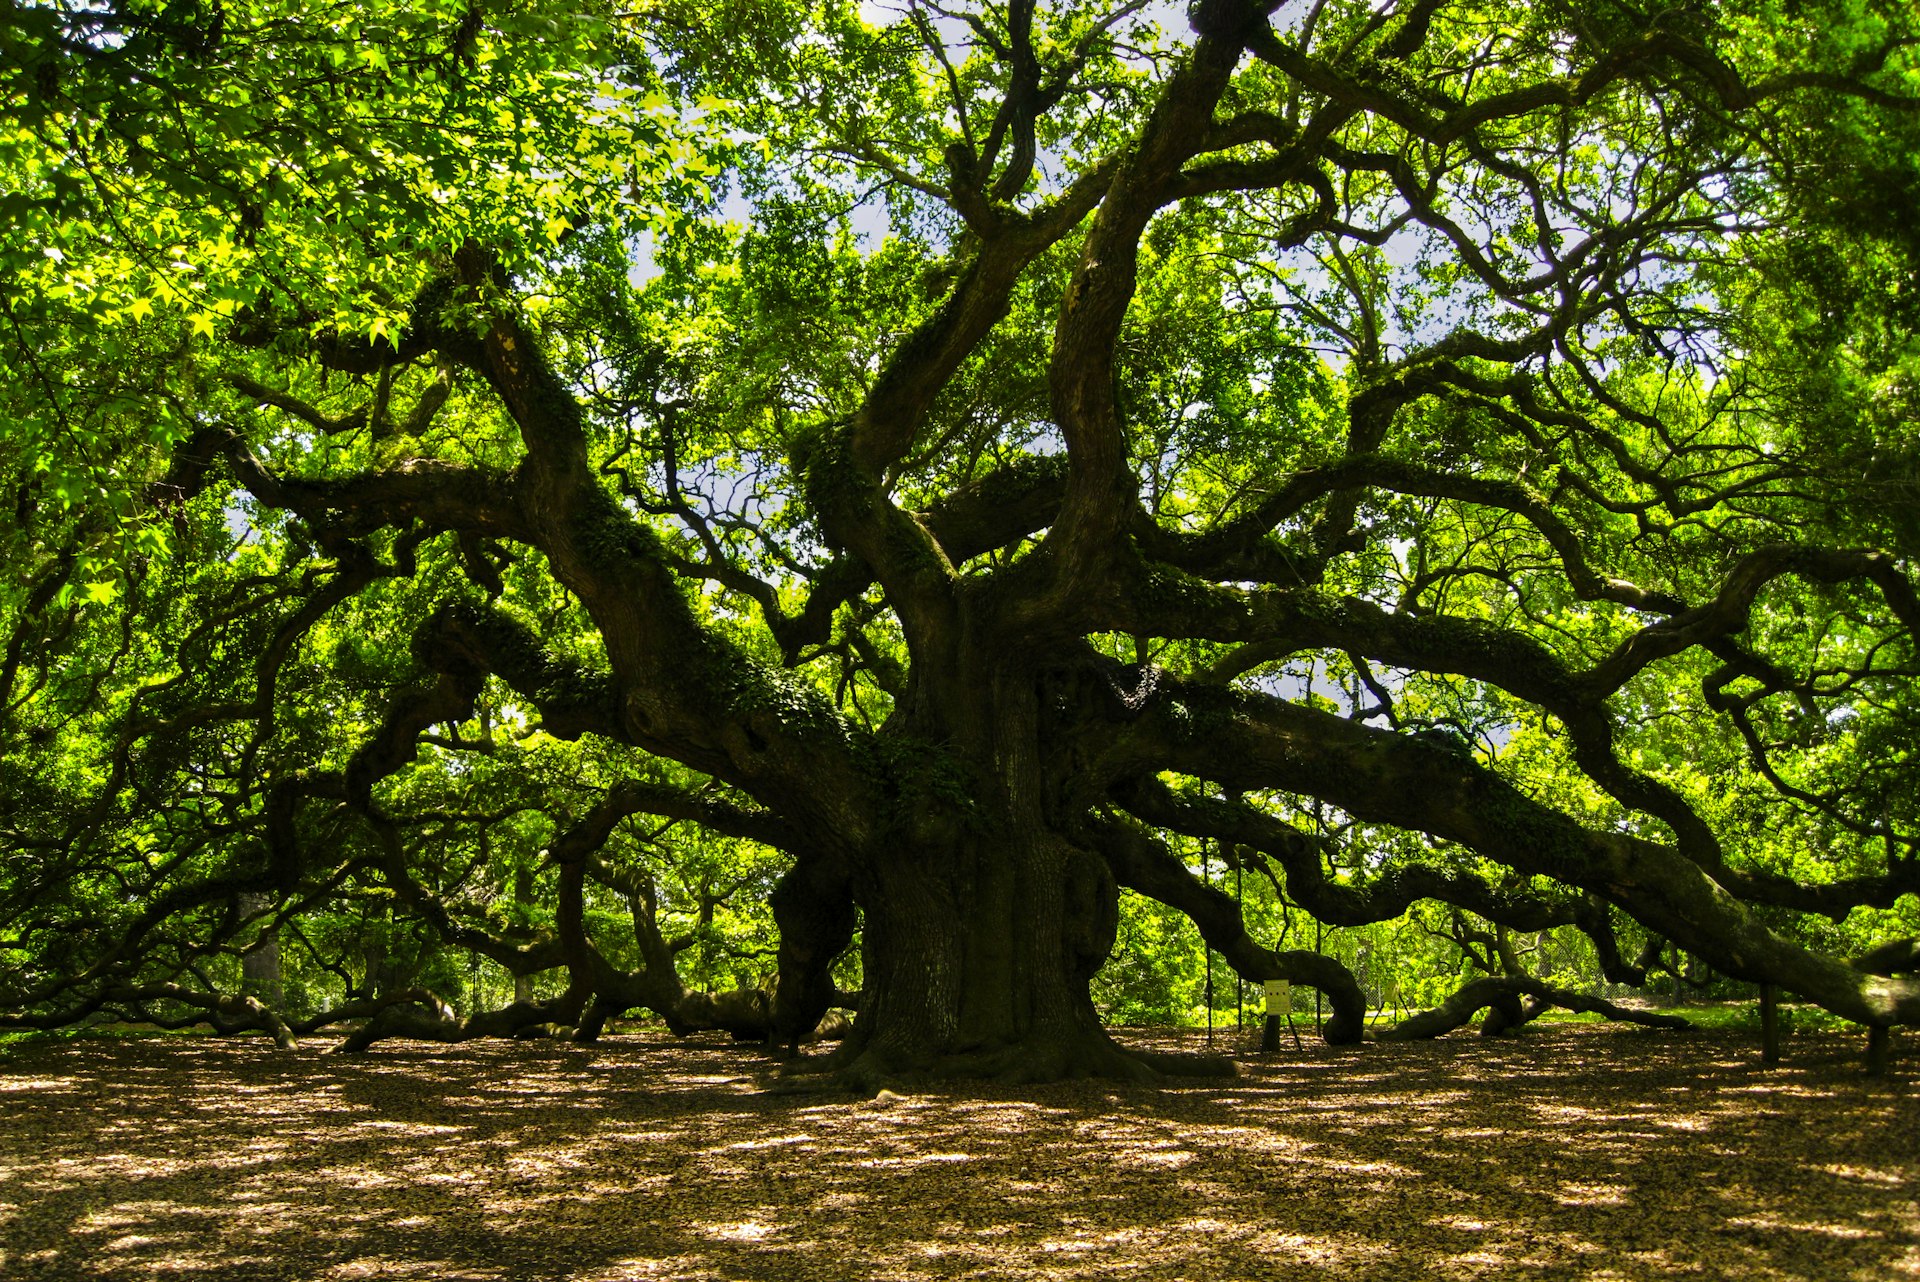 Angel Oak on John's Island near Charleston, South Carolina, USA.  At 1500 years old, it is believed to be the oldest living tree east of the Rockies.